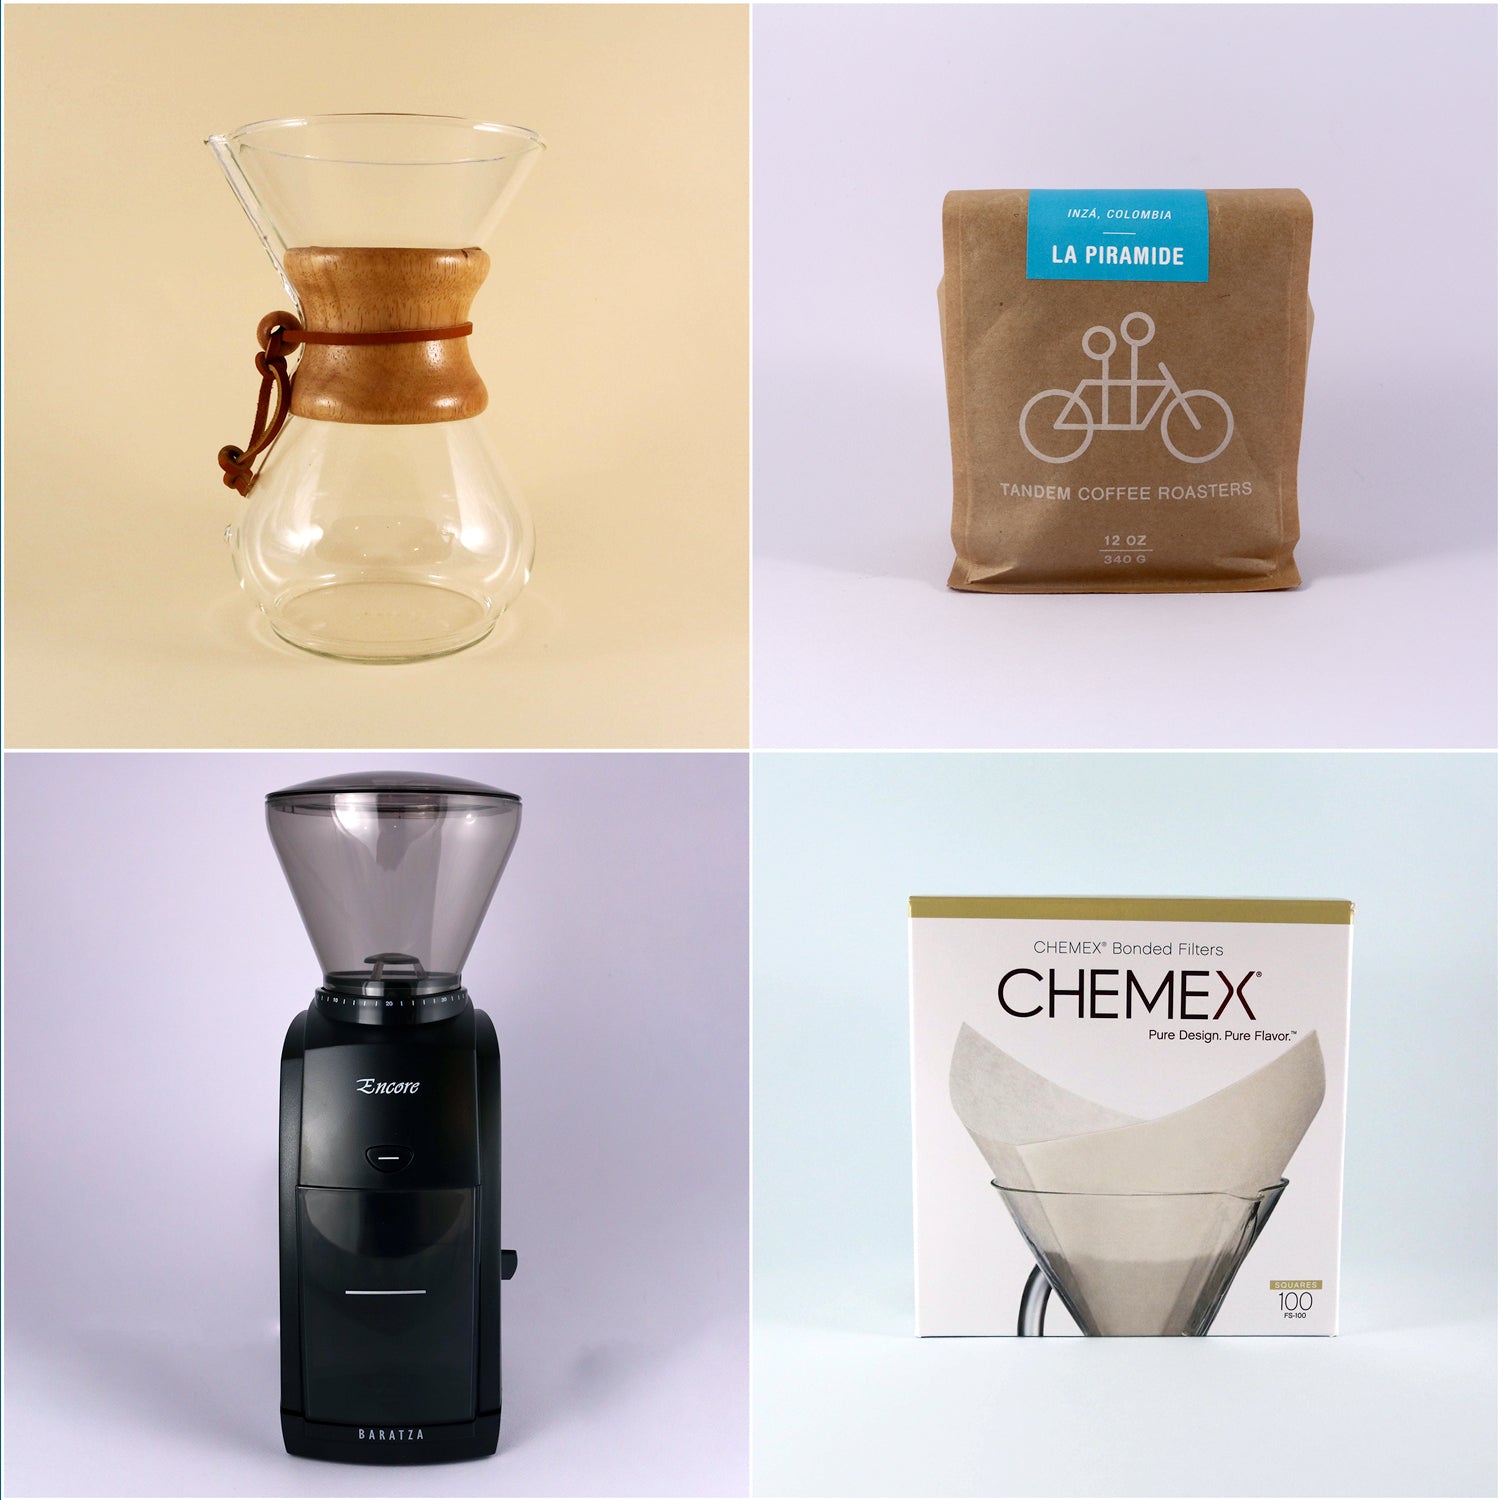 A collage of four images: top left shows the text "Chemex Starter Kit", top right features a Chemex coffee maker, bottom left displays a bag of "freshly roasted La Pir" from Tandem Coffee Roasters.